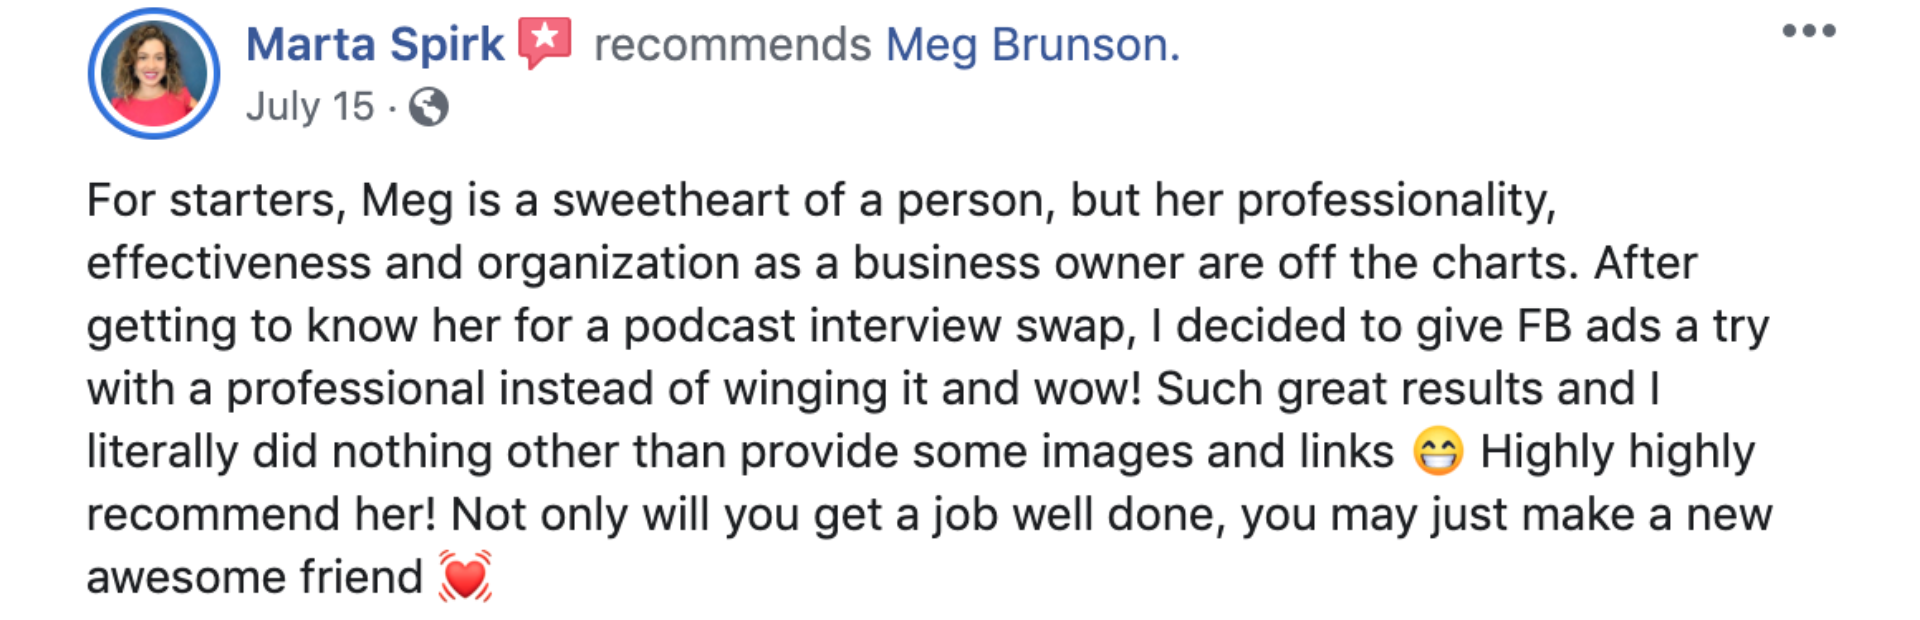 Meg is a sweetheart of a person, and her professionality, effectiveness, and organization as a business owner are off the charts... Highly highly recommend her! Not only will you get a job well done, you may just make a new awesome friend! Marta Spirk. Screenshot from Facebook.